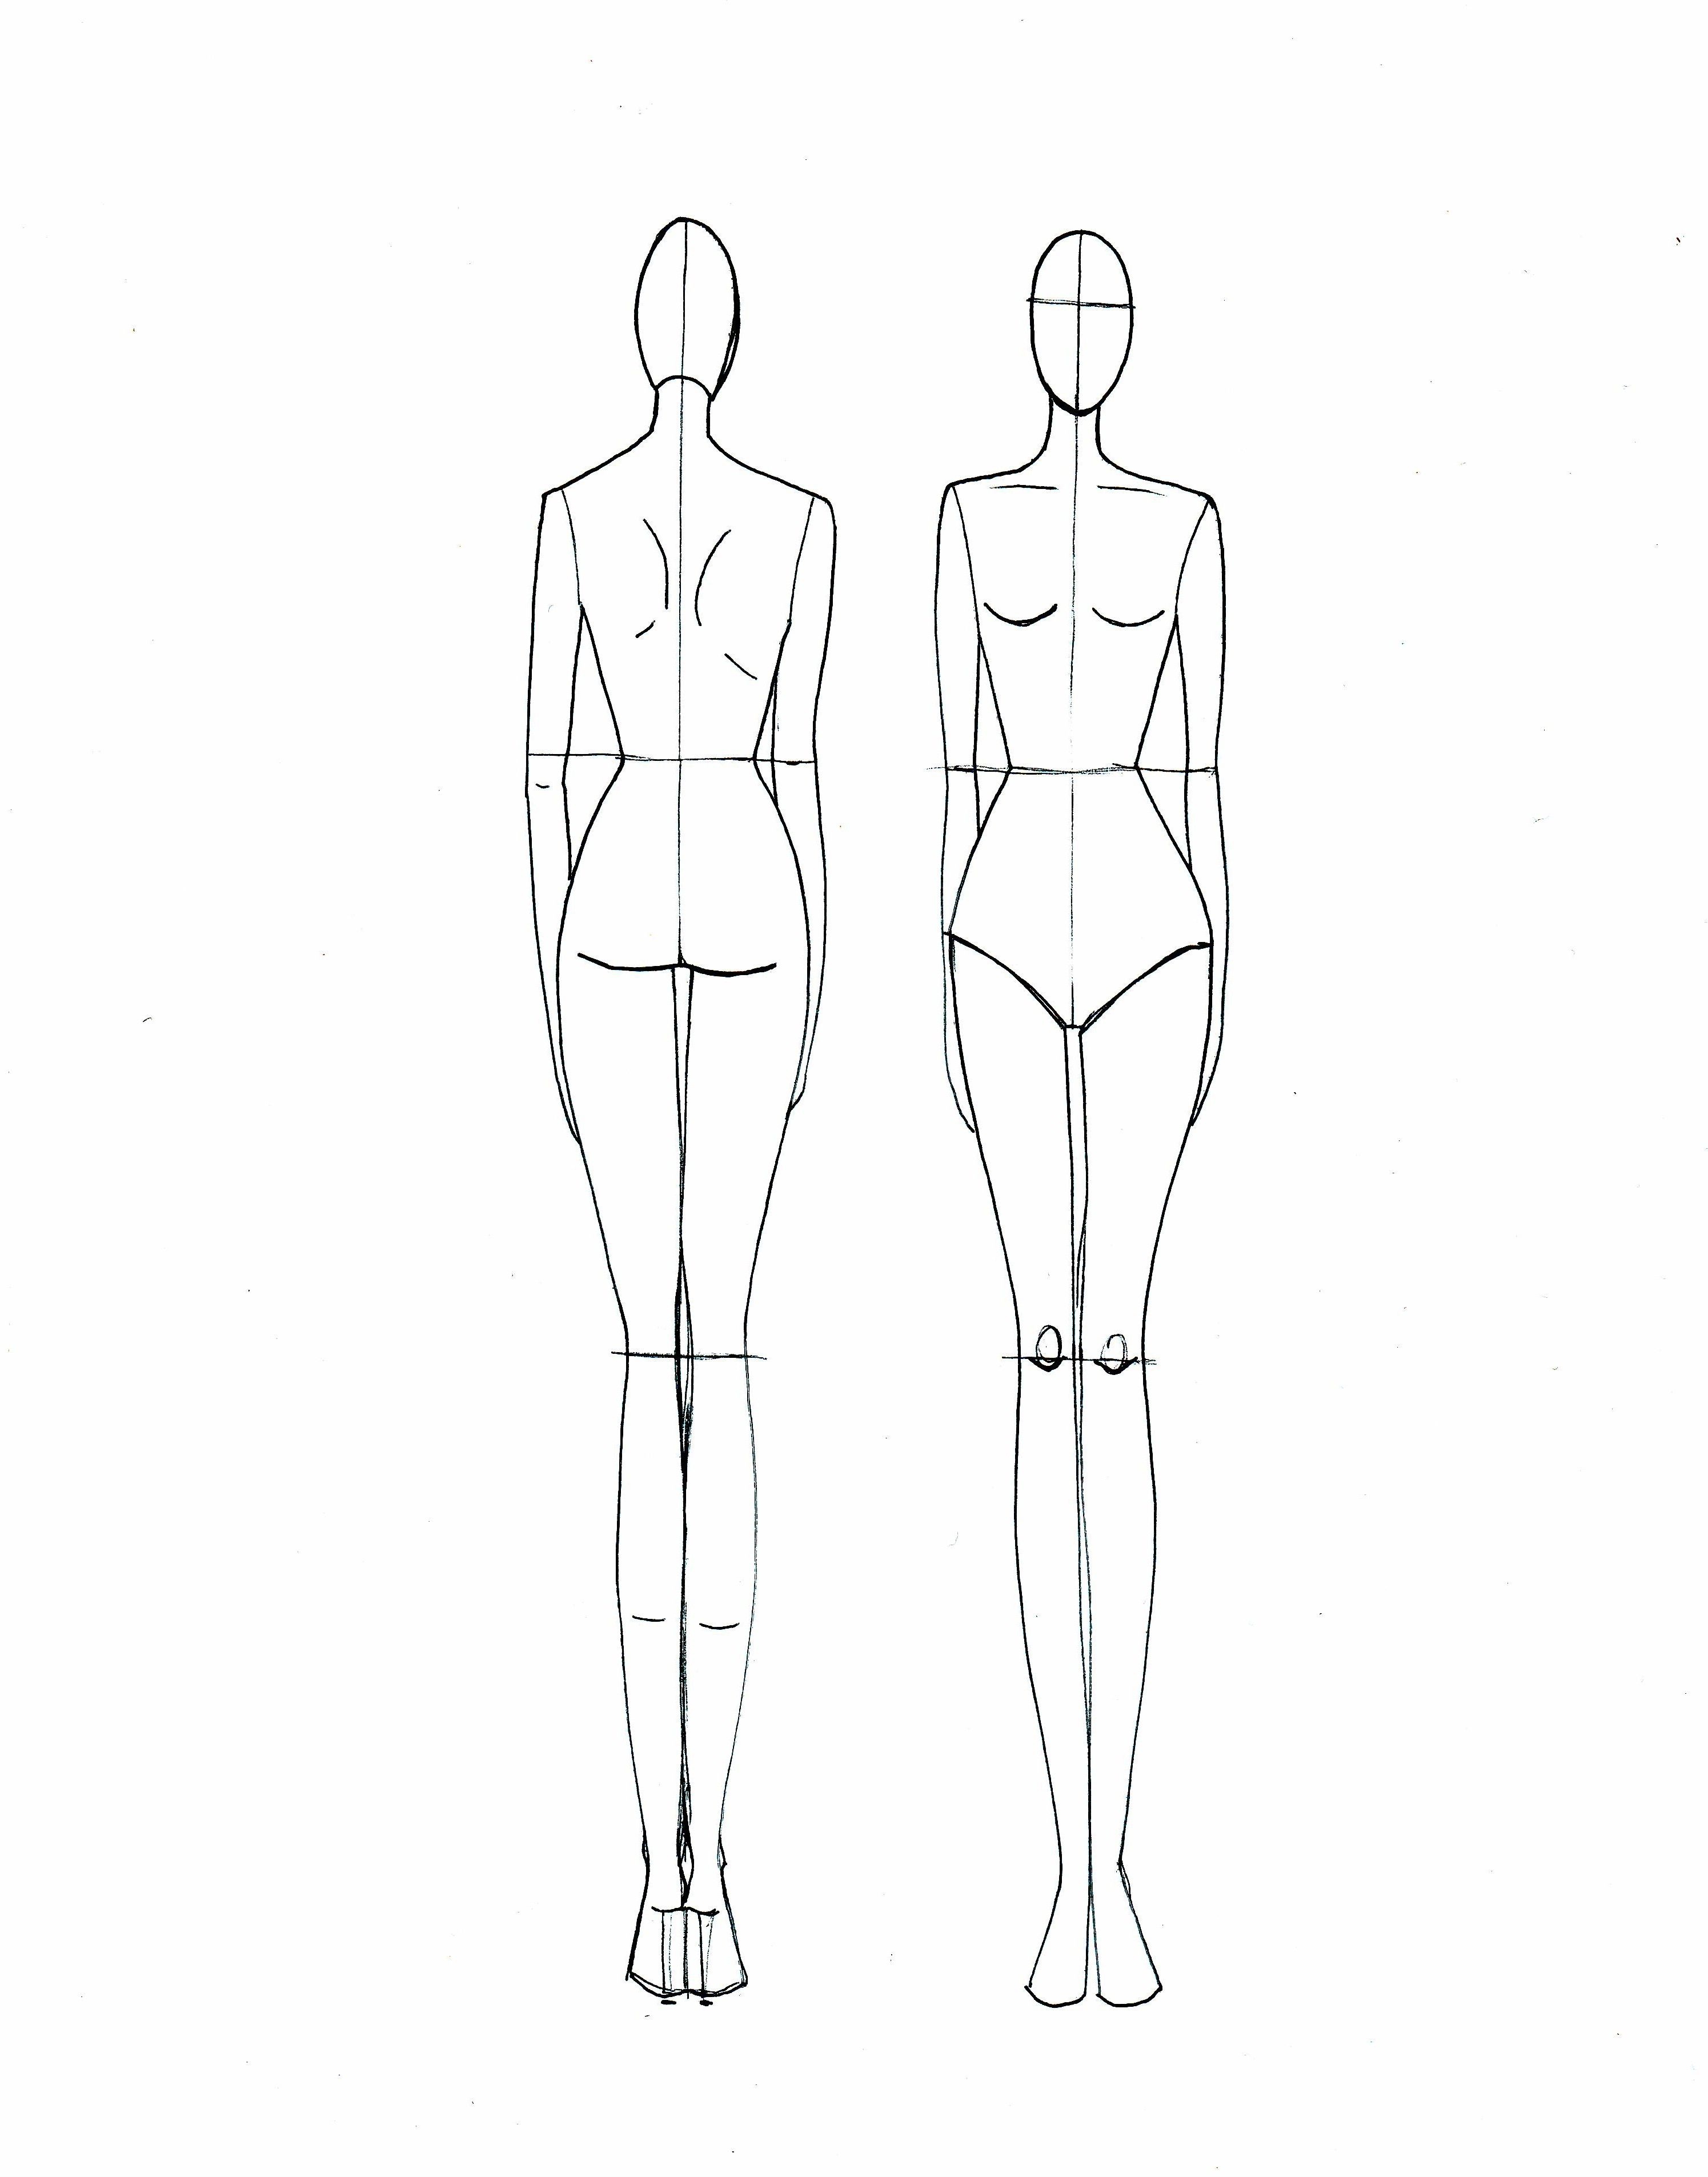 Body Sketch Template At Paintingvalley | Explore Collection Of - Free Printable Fashion Model Templates